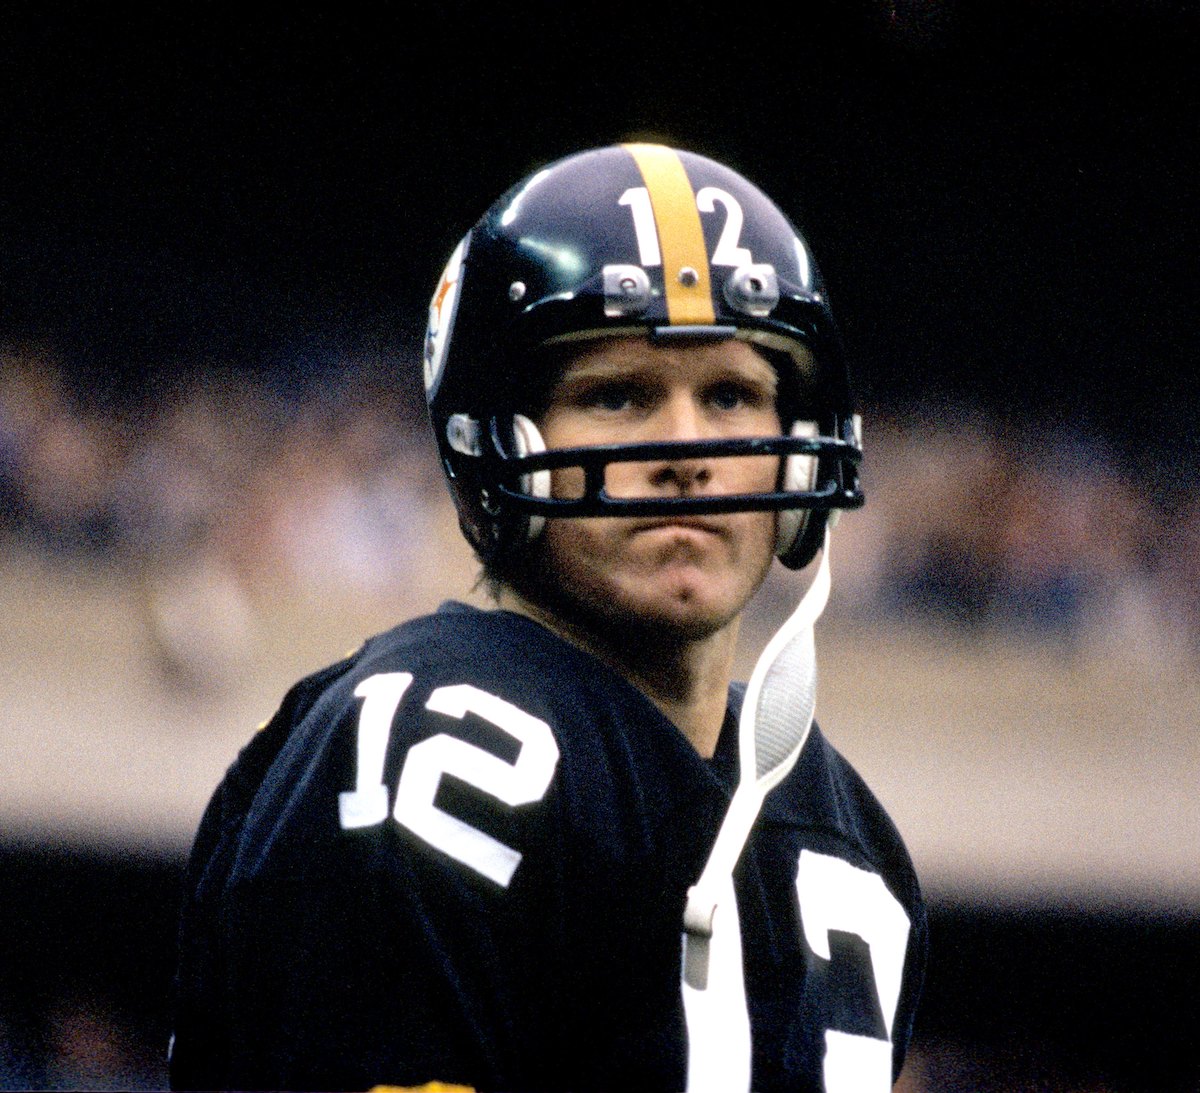 Terry Bradshaw About to Pass | Neil Leifer | Pittsburgh 